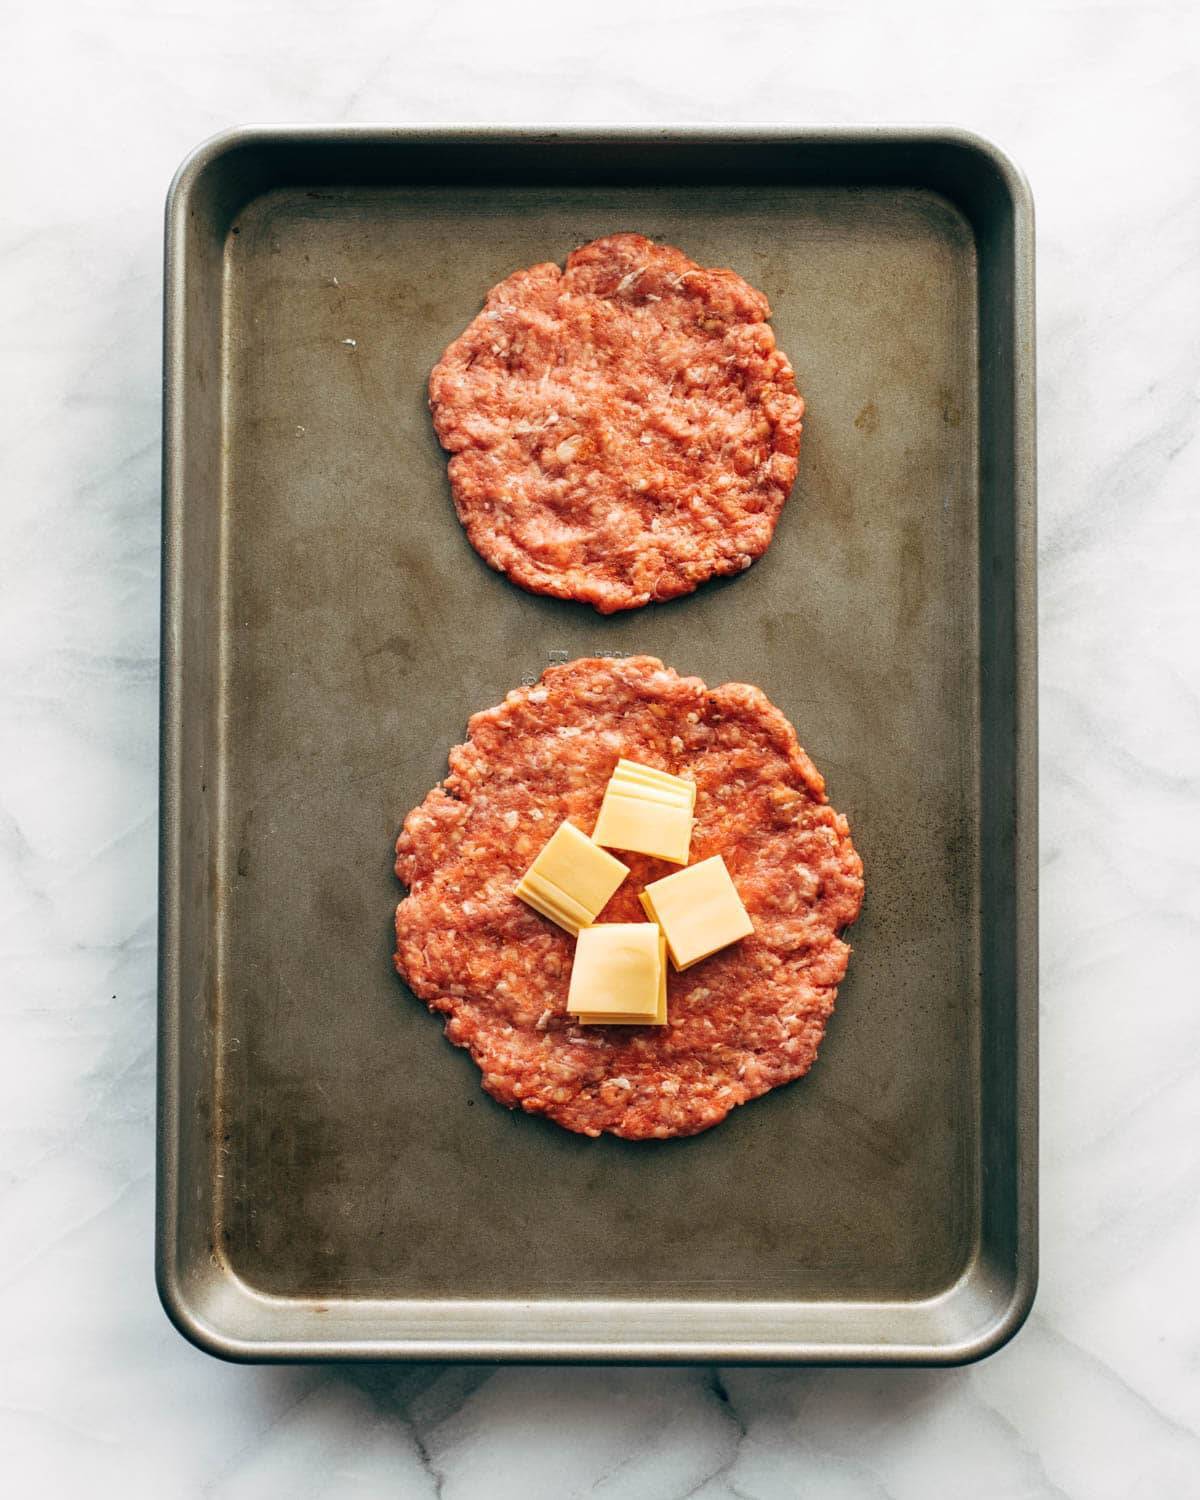 Adding cheese to two burger patties.